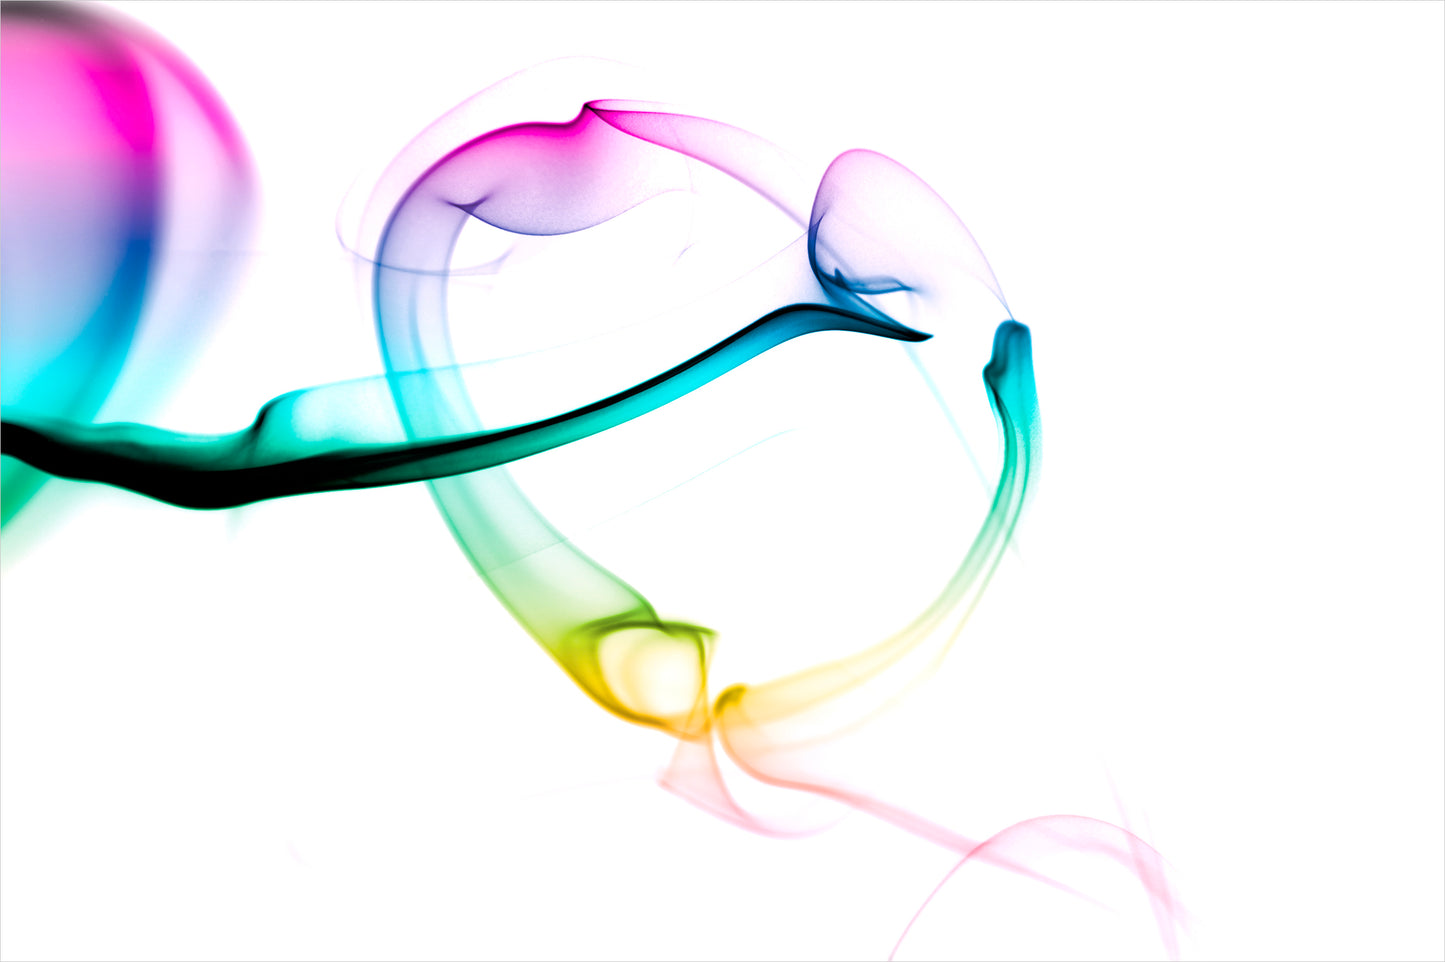 abstract heart in pink, green, gold, teal, red on white background